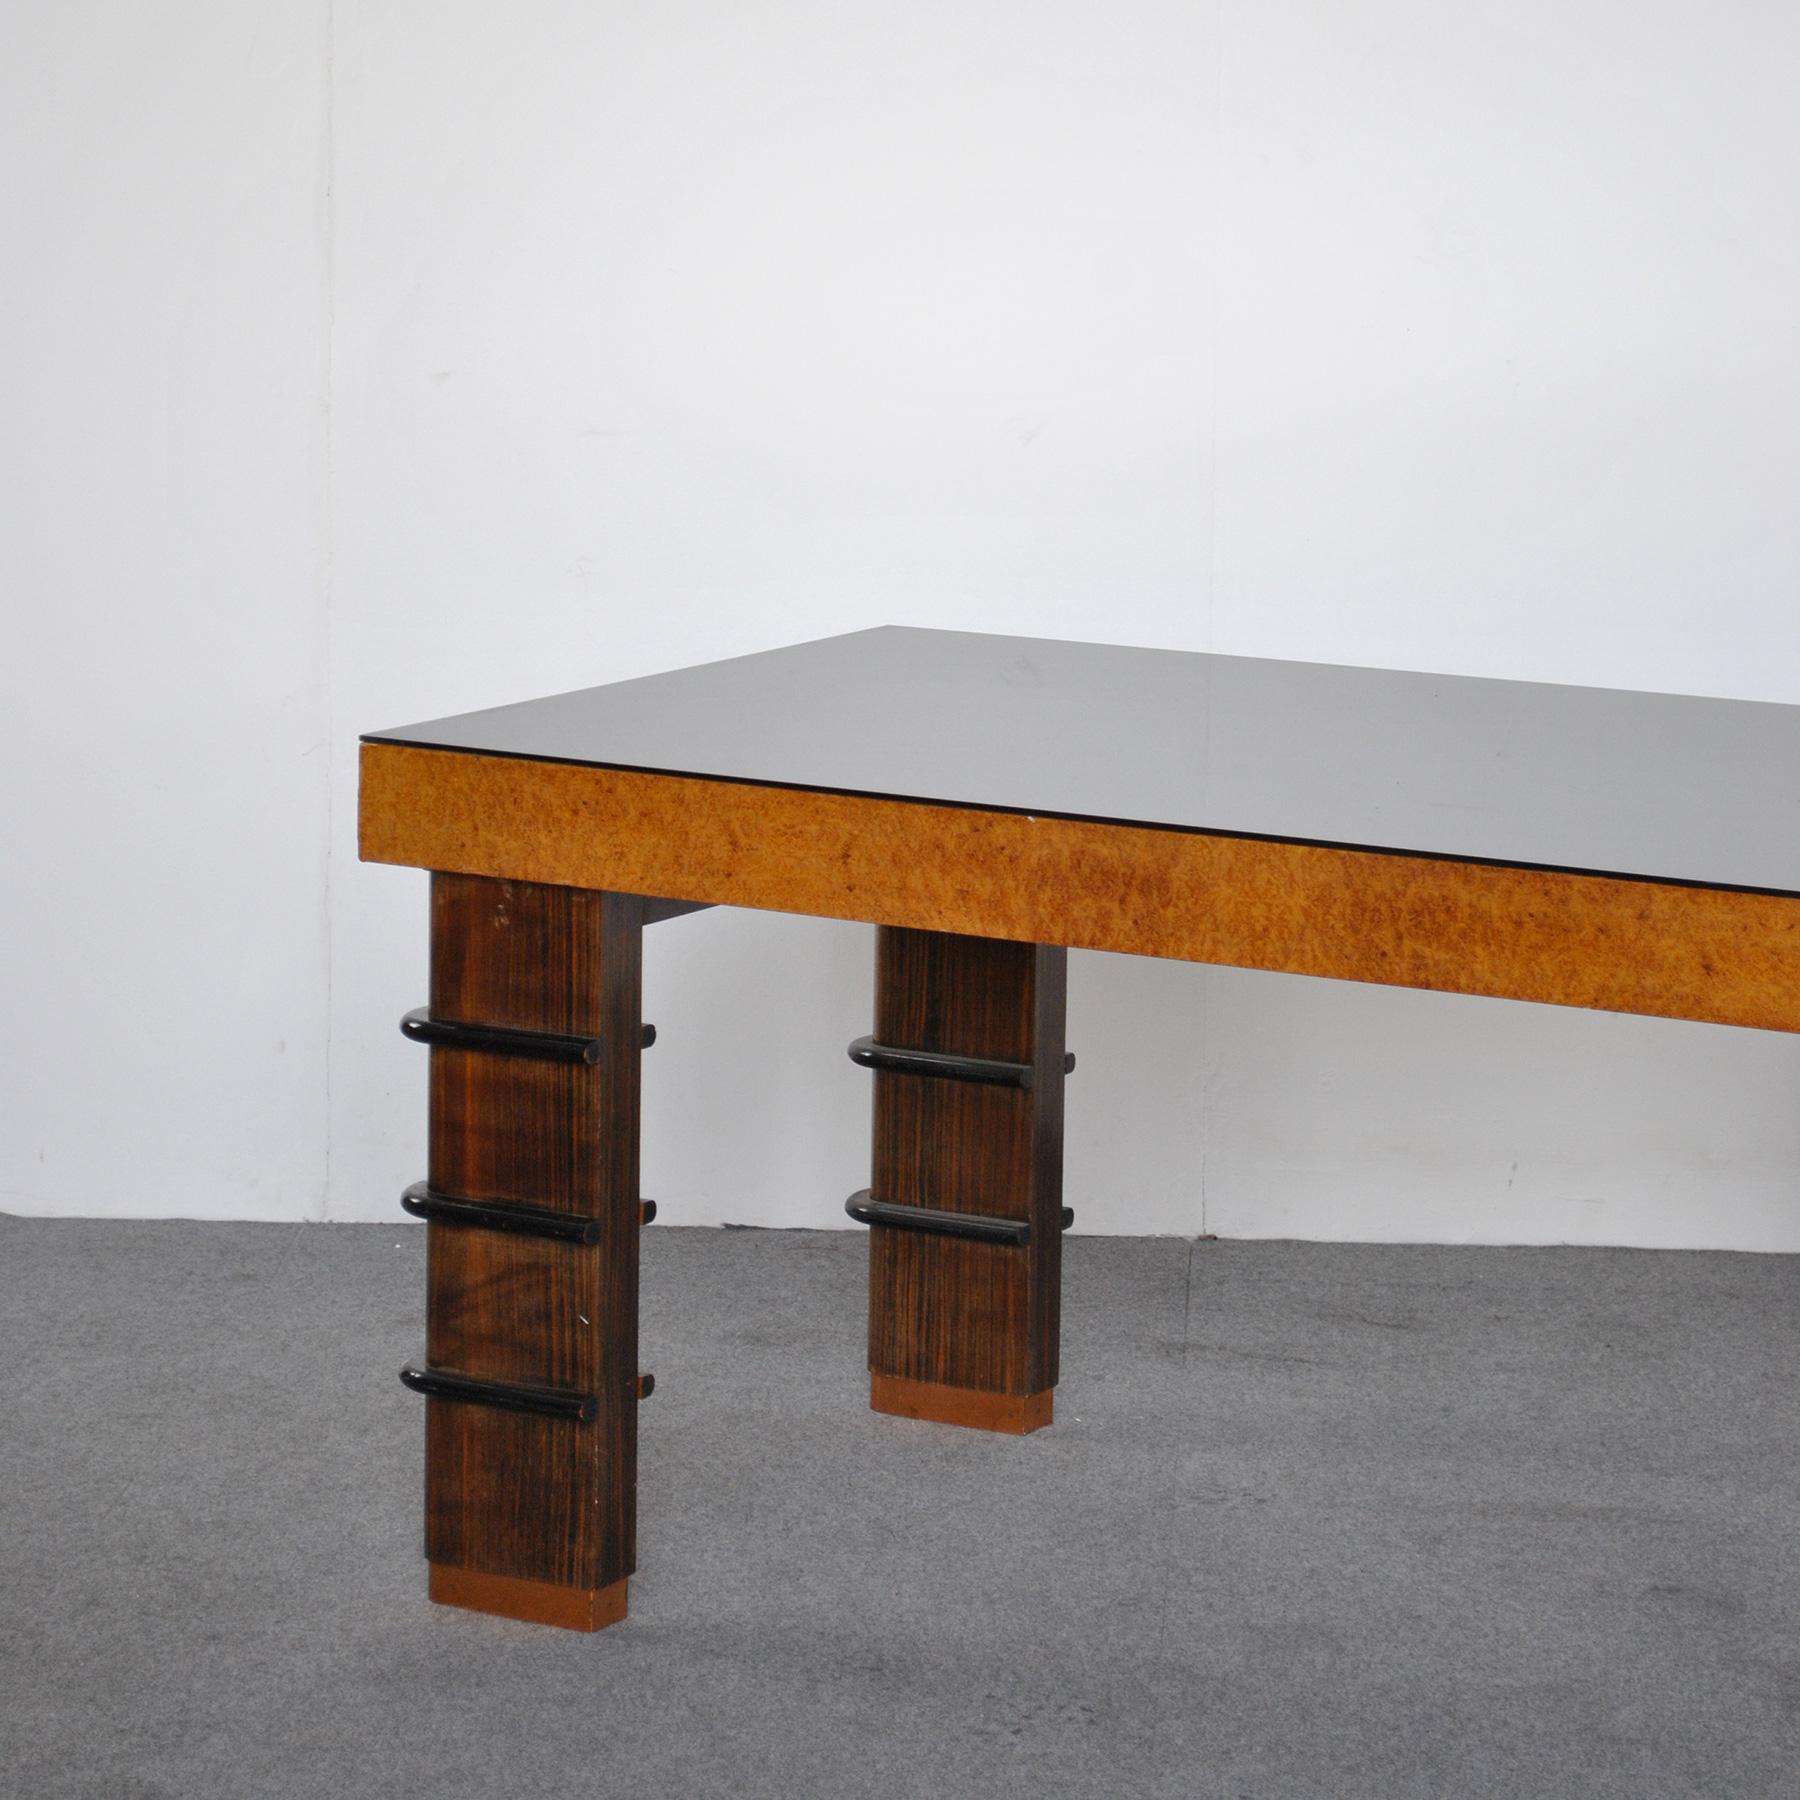 Mid-20th Century Italian Art Deco Table from the Late 1940s